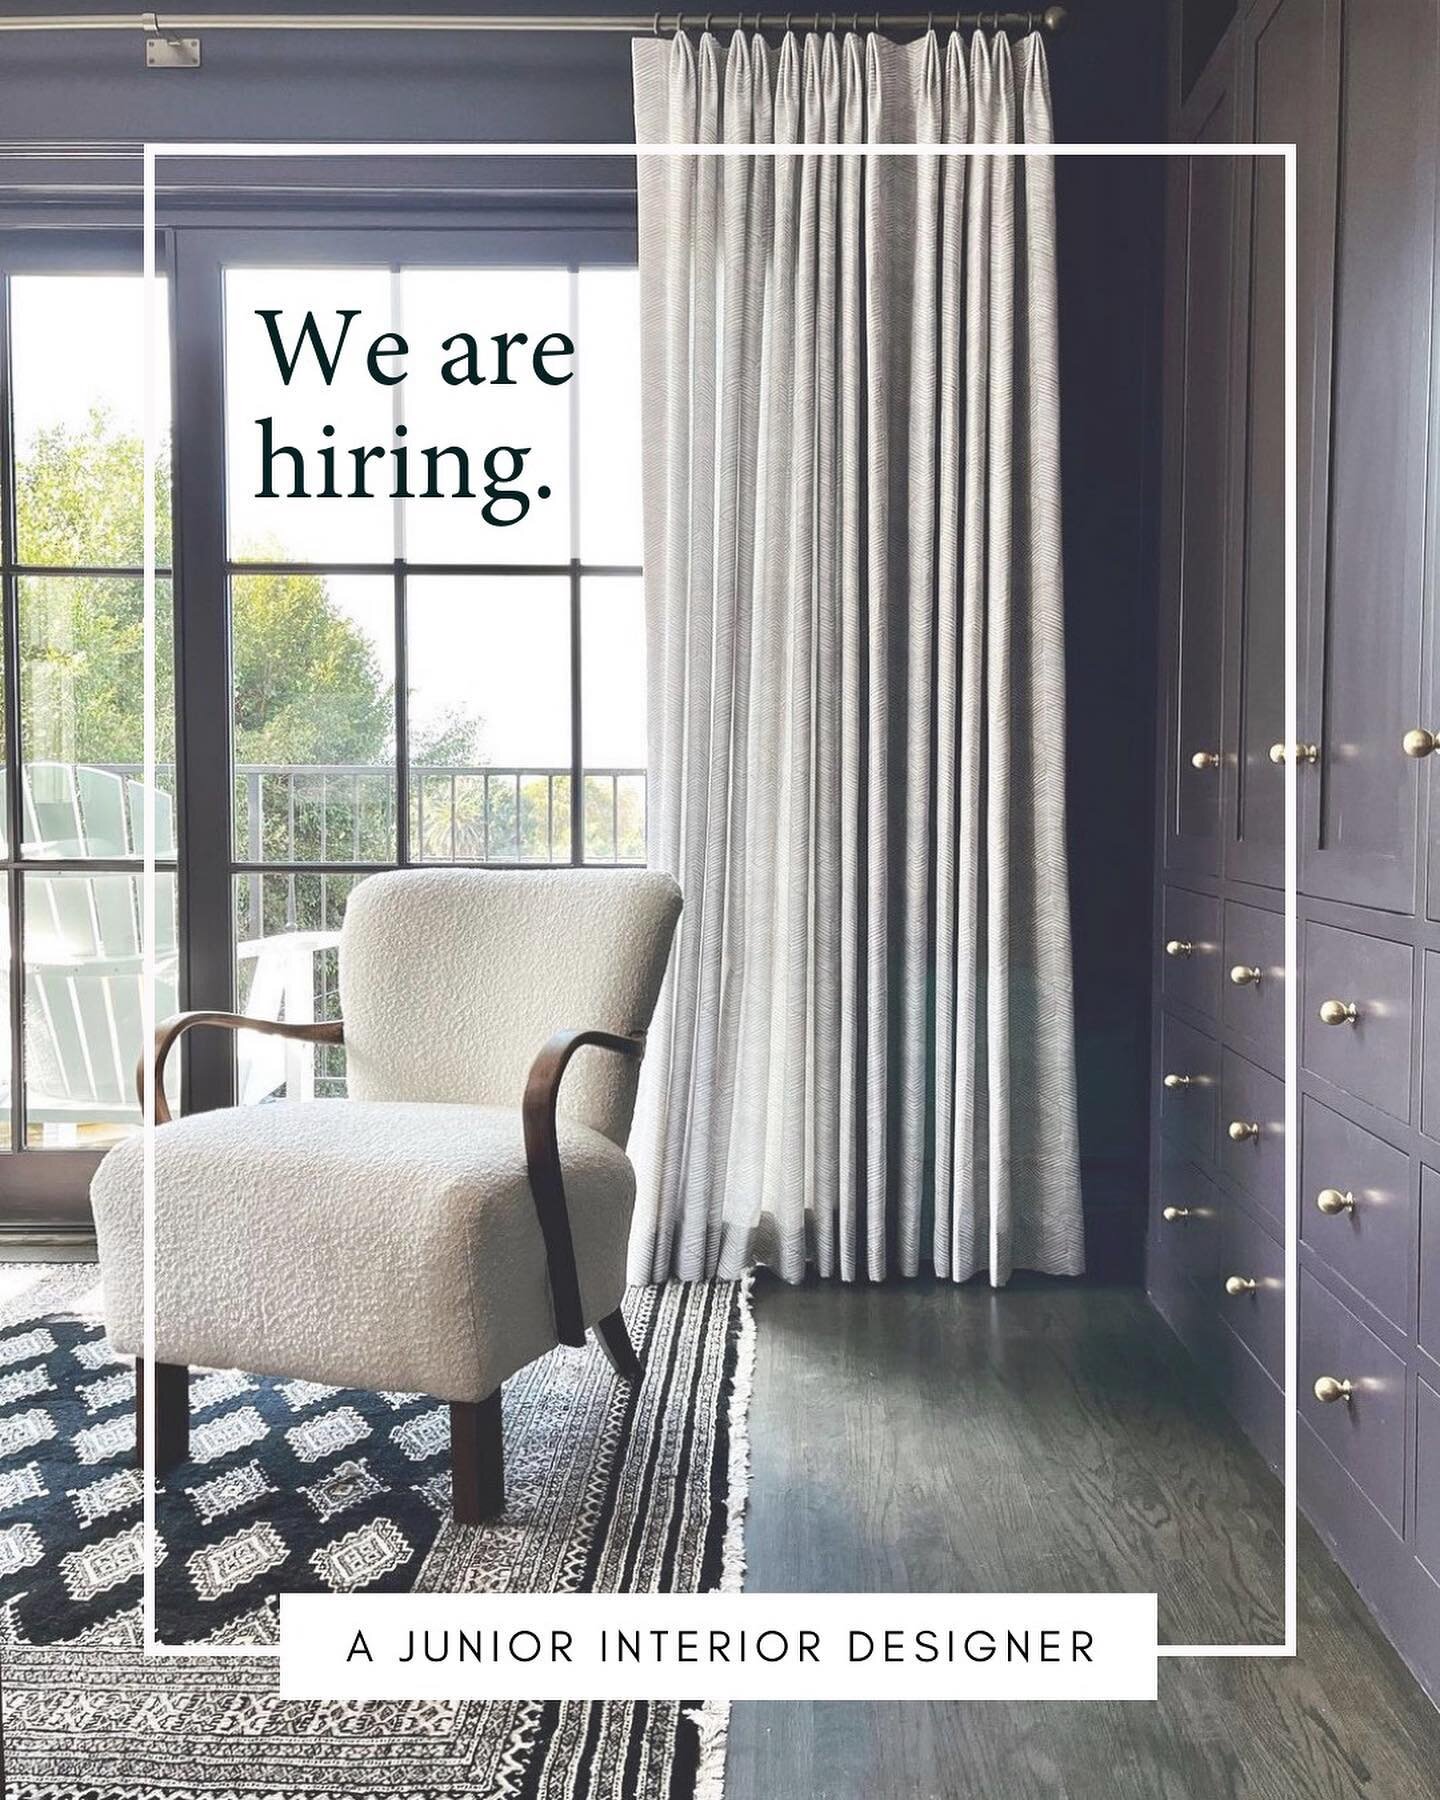 We&rsquo;re hiring a Junior Interior Designer to join our team in the South Bay Area of Los Angeles. Must be local. Details in profile link. Sound like a fit? We&rsquo;re excited to hear from you!

#interiordesigner #nowhiring #hiringlosangeles #juni